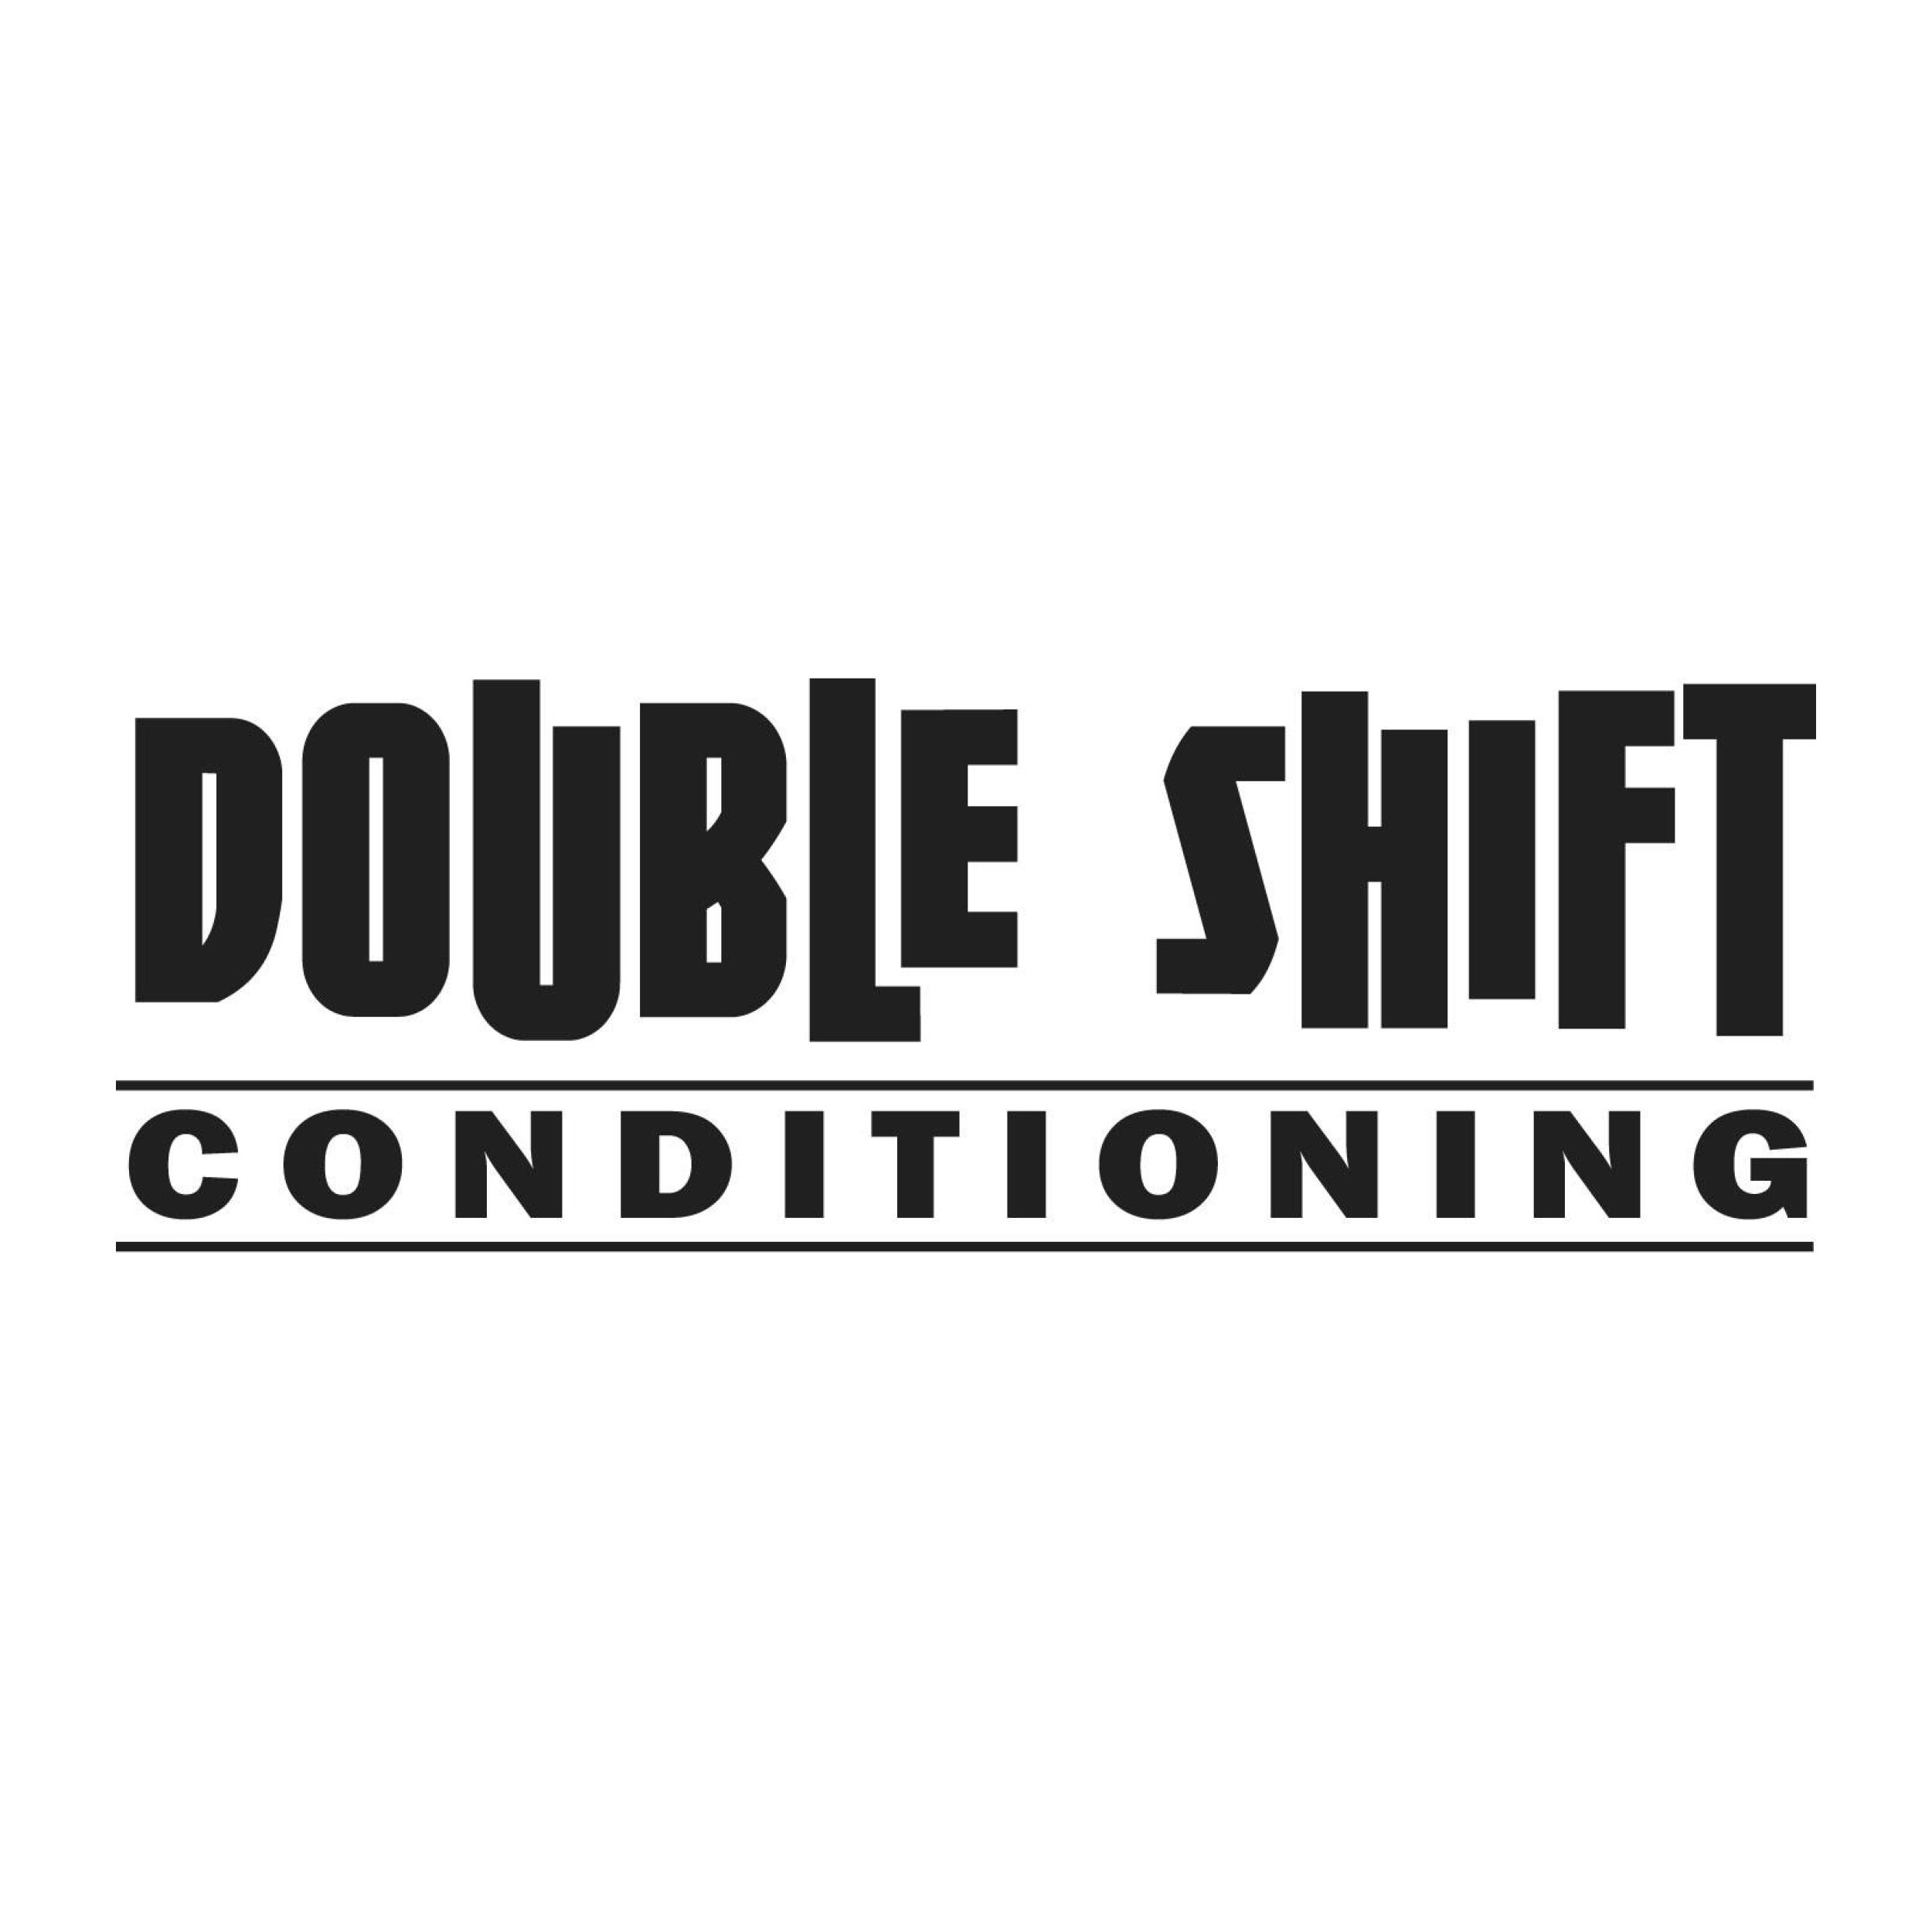 Doubleshift Conditioning